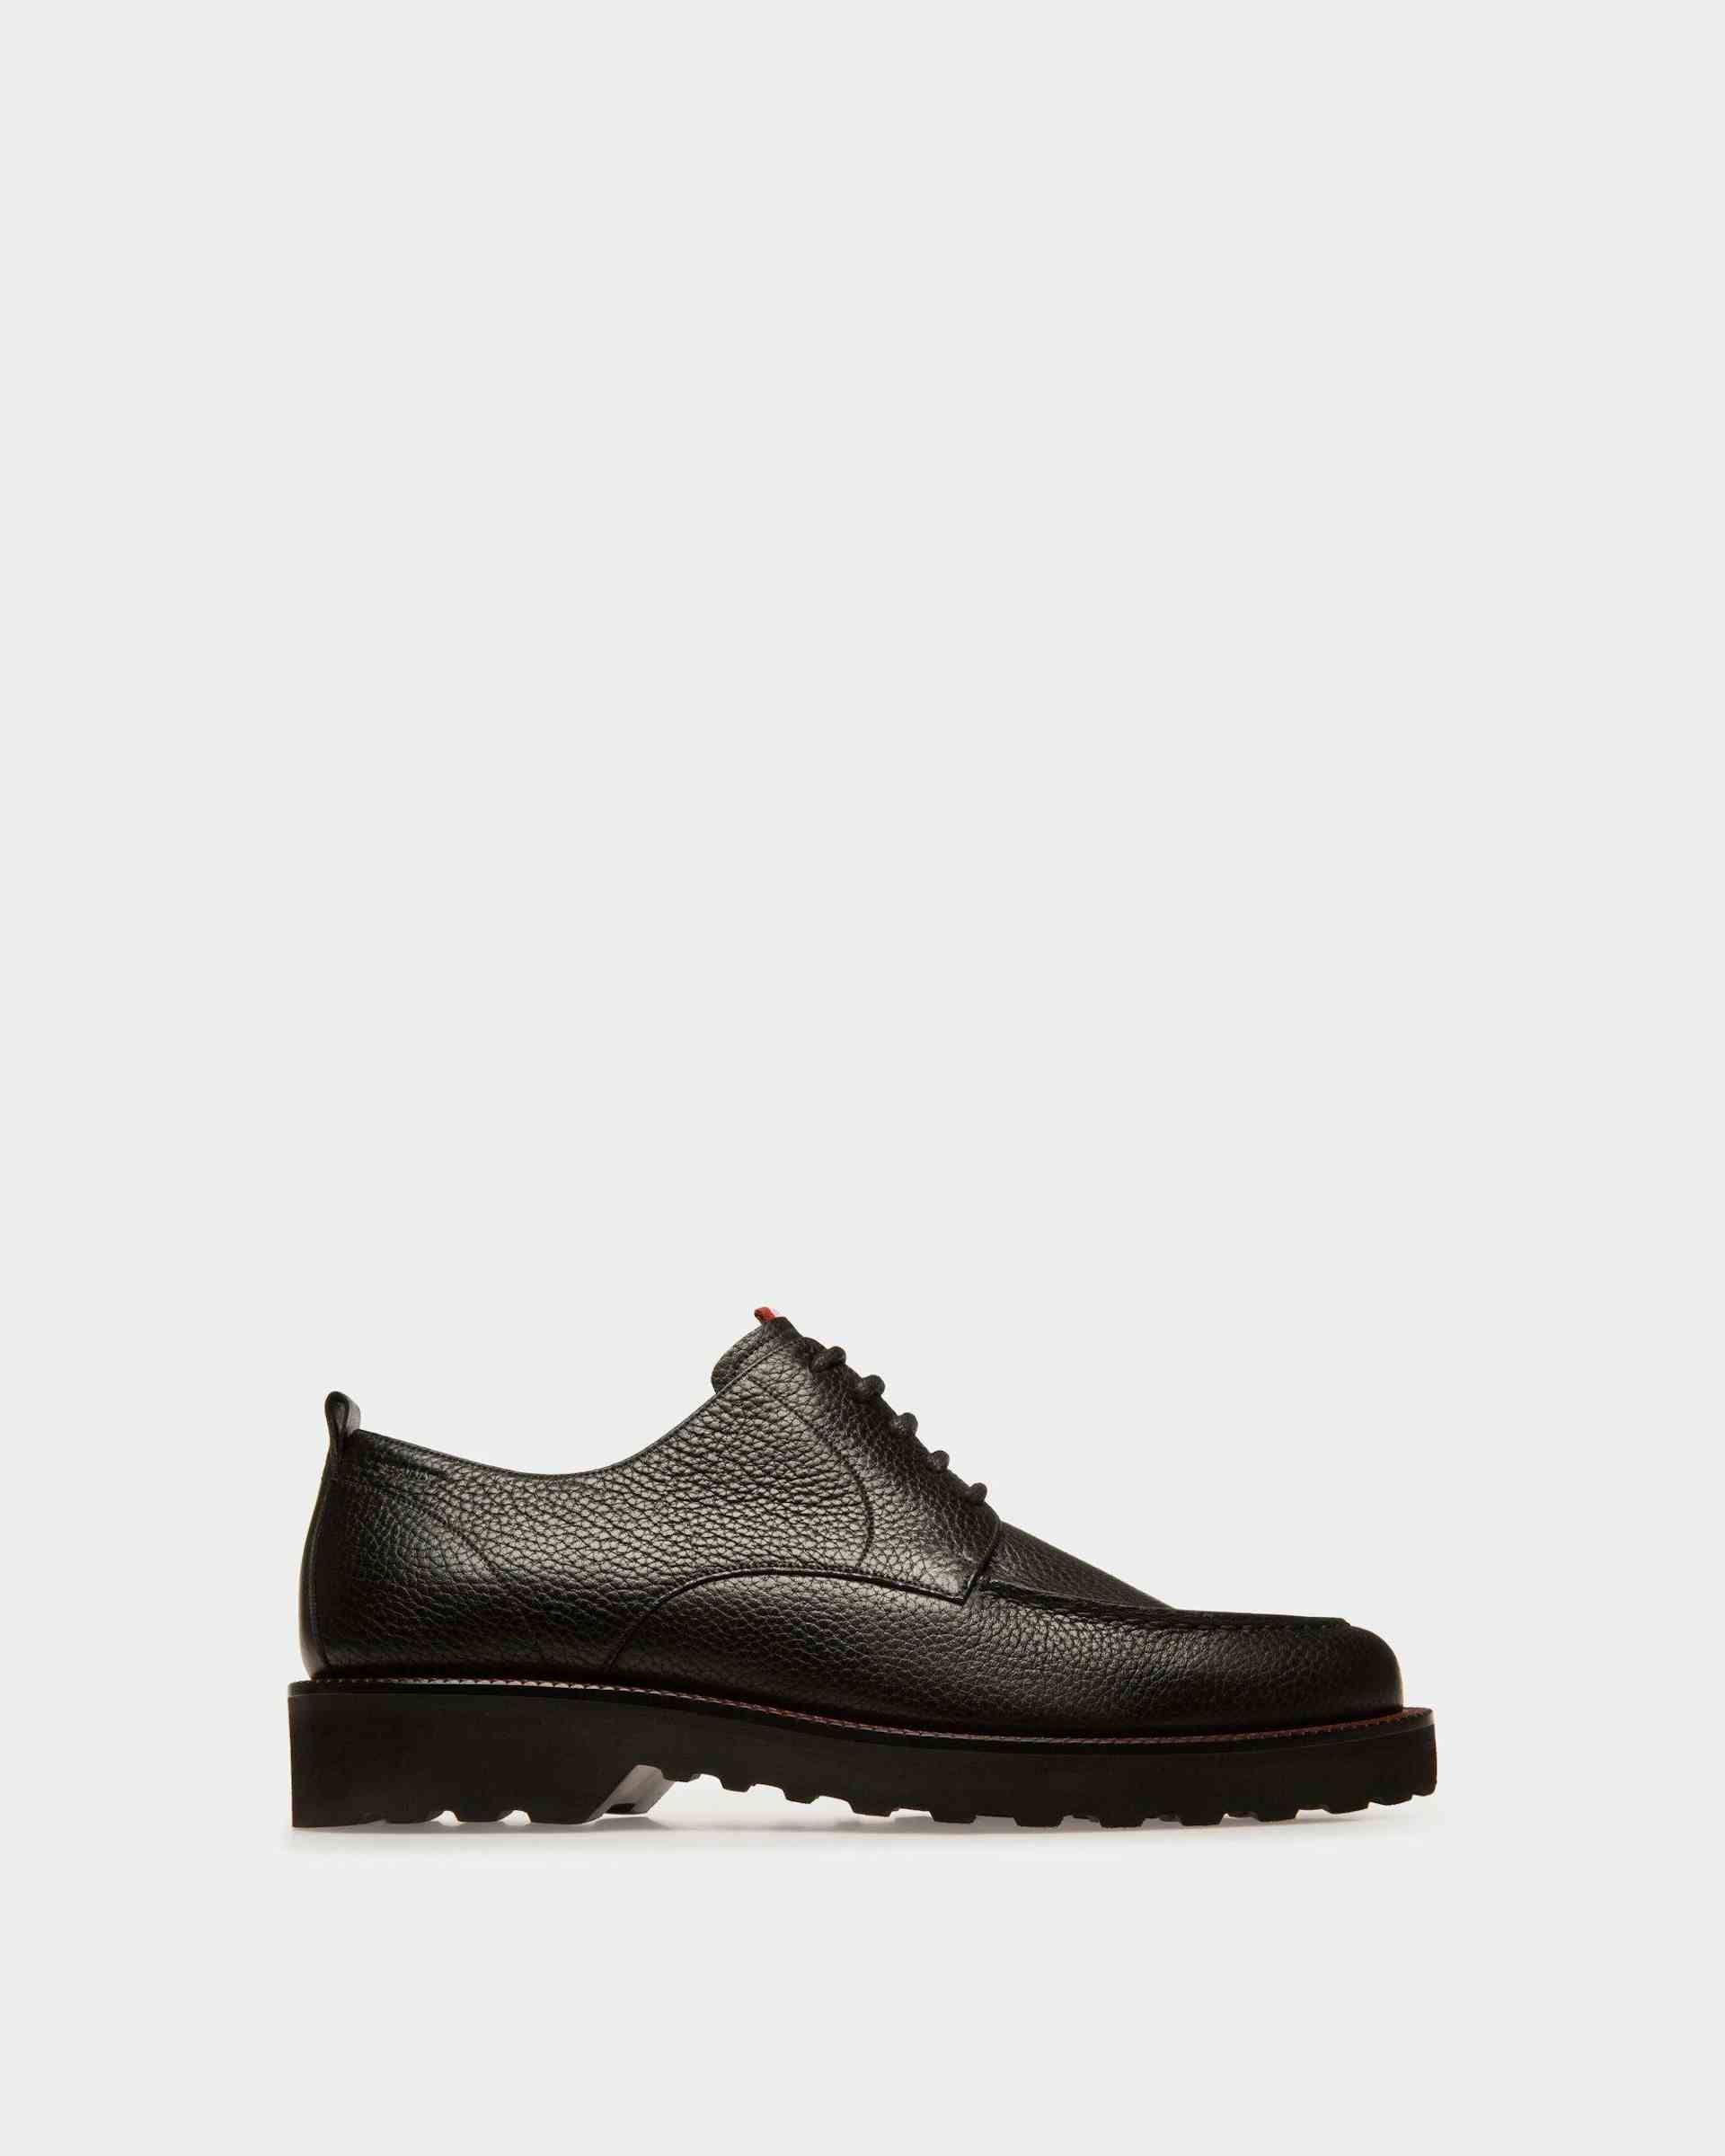 NOTTINGHAM Leather Derby Shoes In Black - Men's - Bally